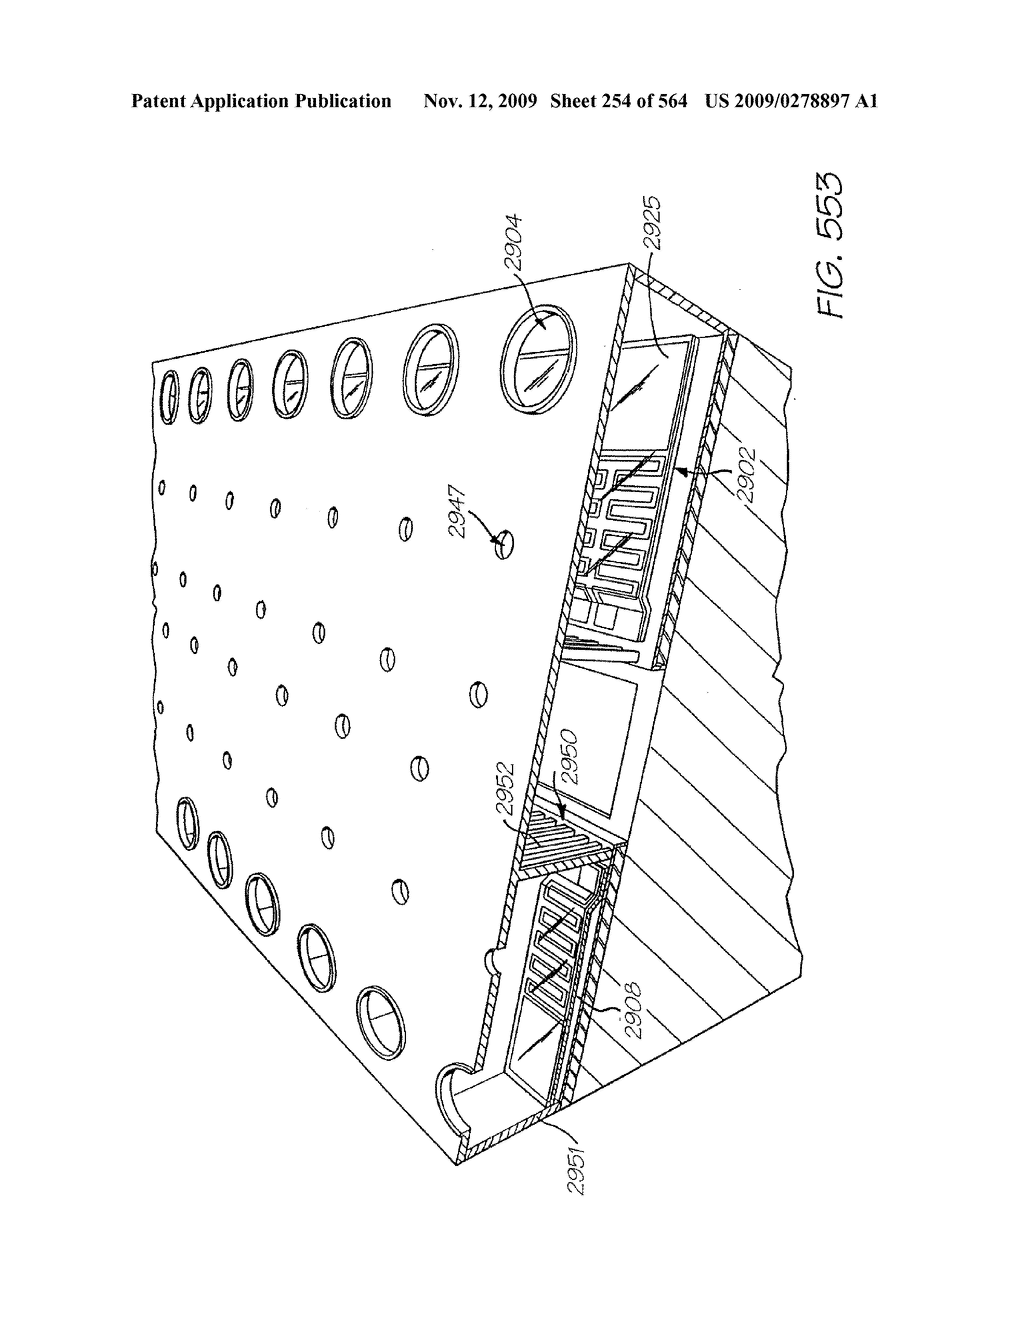 Inkjet Printhead With Nozzle Chambers Each Holding Two Fluids - diagram, schematic, and image 255